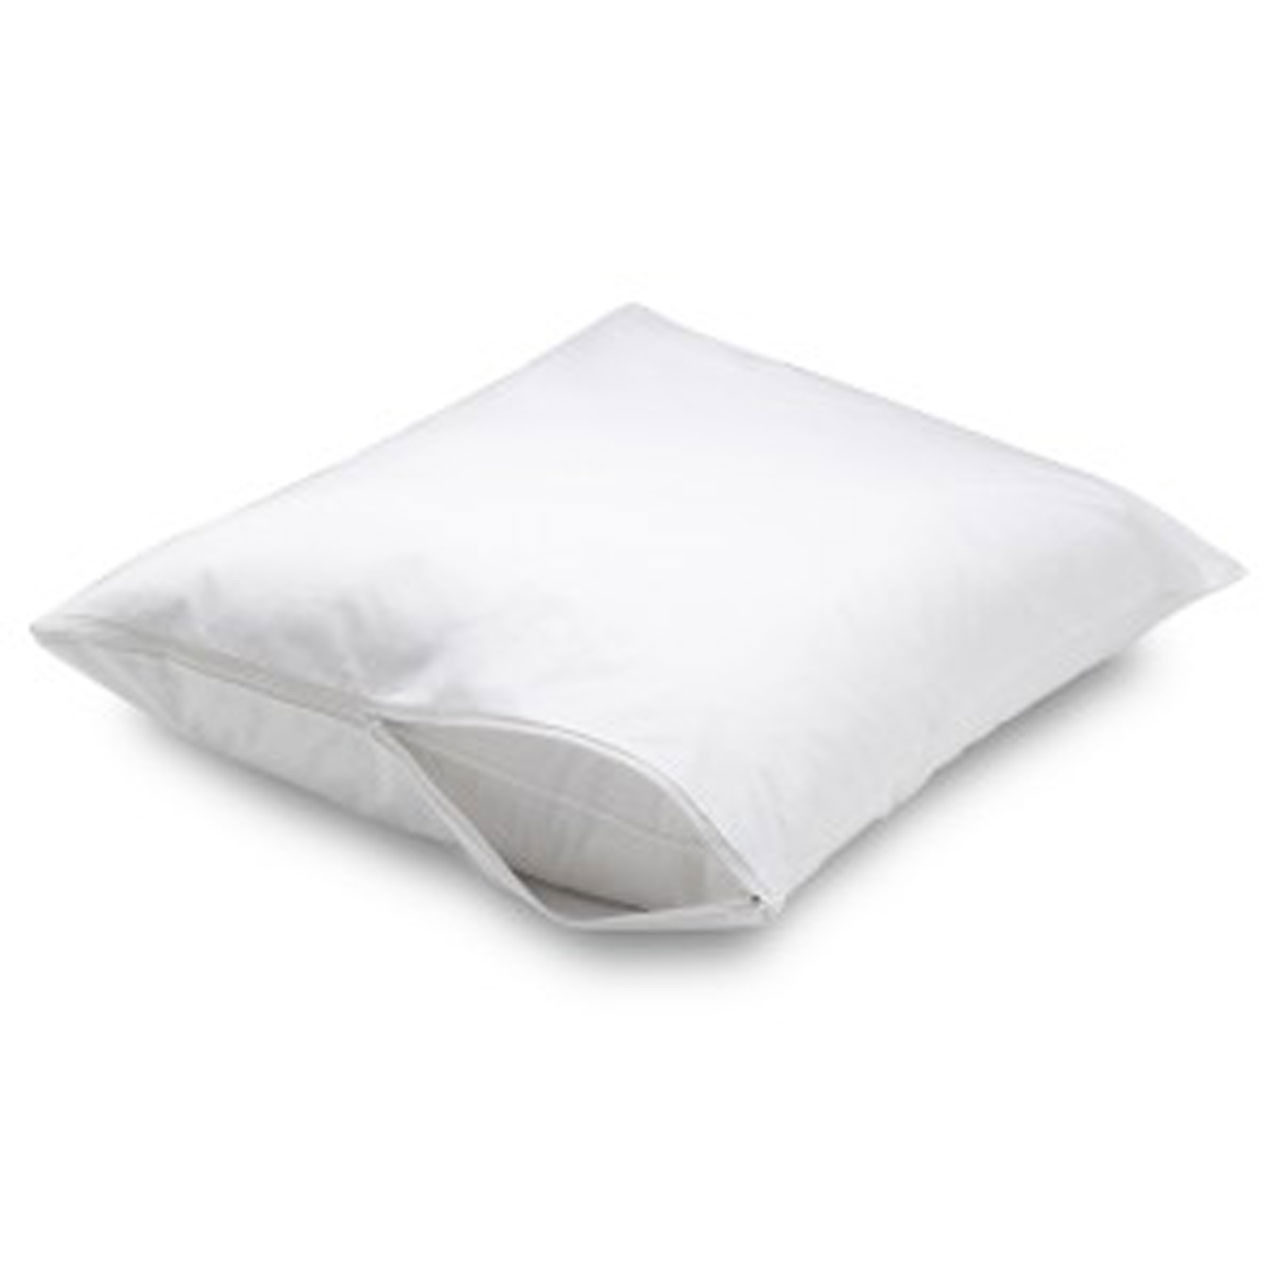 How is the design of these bulk pillow protectors with woven zippered features?